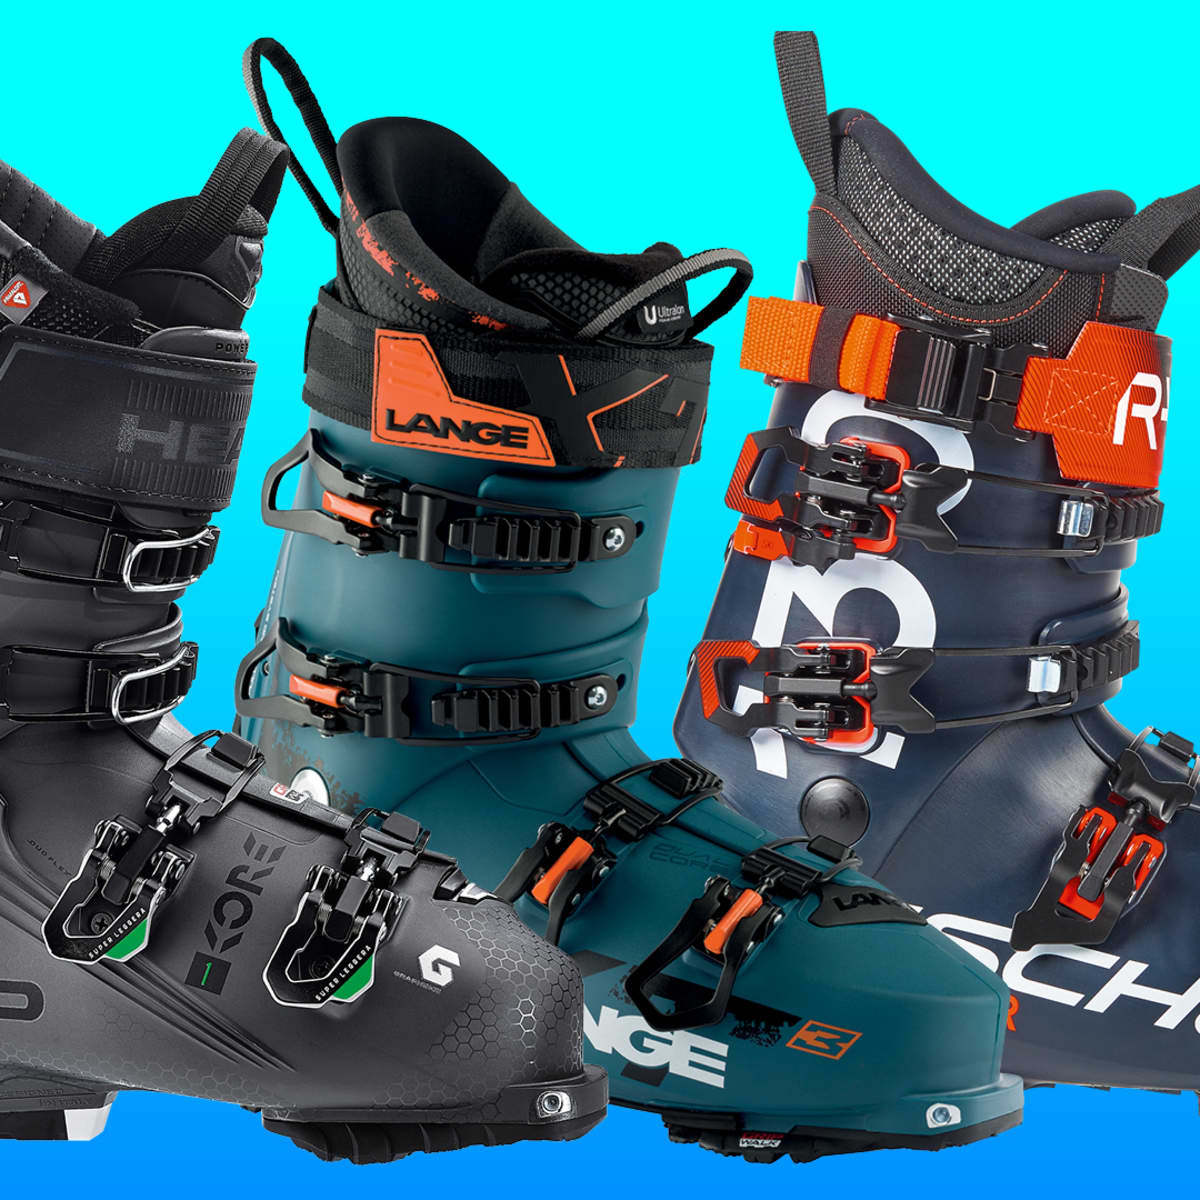 The Best Hybrid Boots of 2021 - Powder